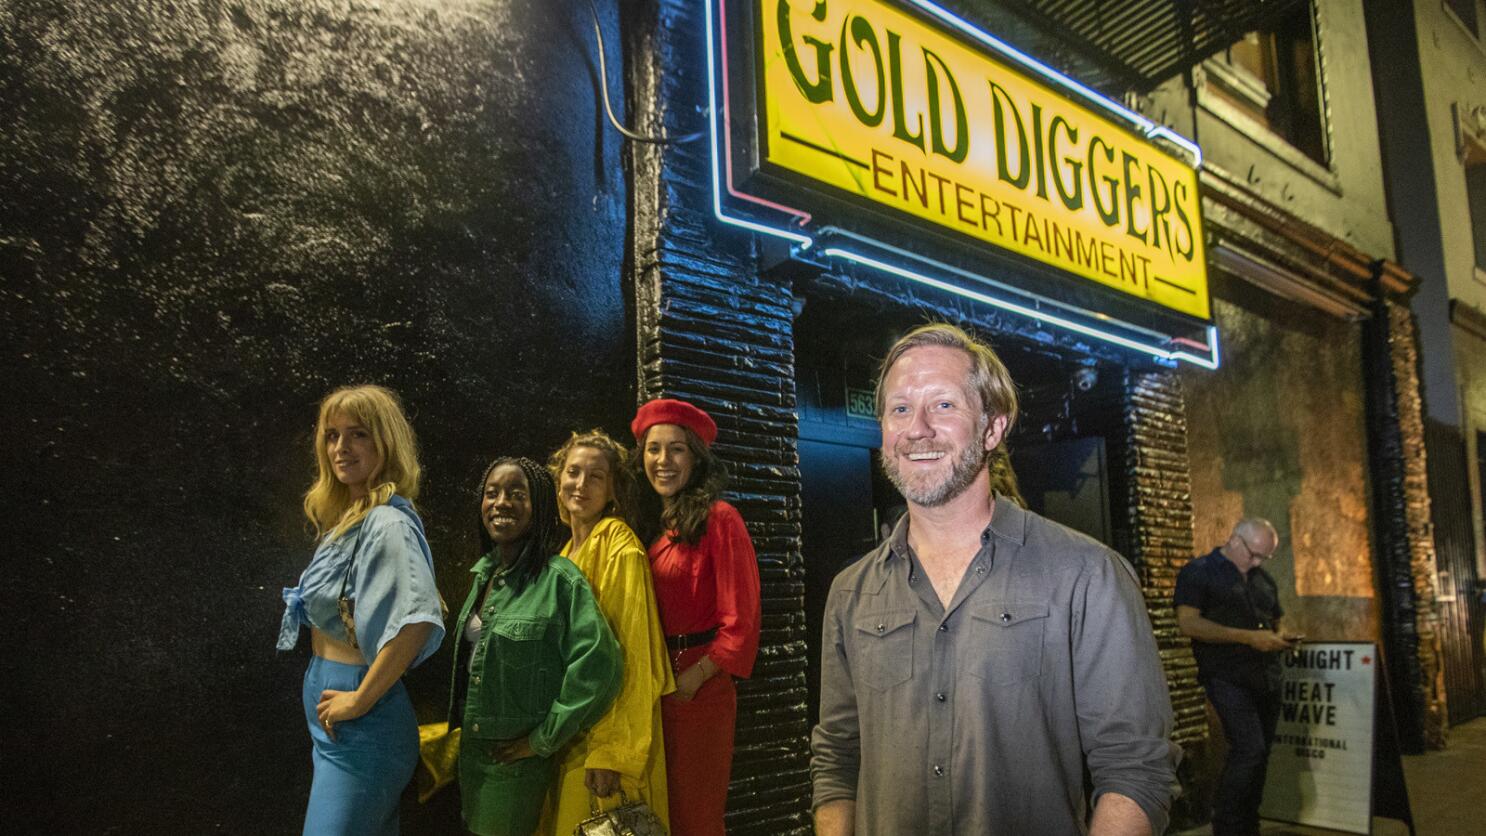 We caught up with the team behind iconic LA venue Gold-Diggers